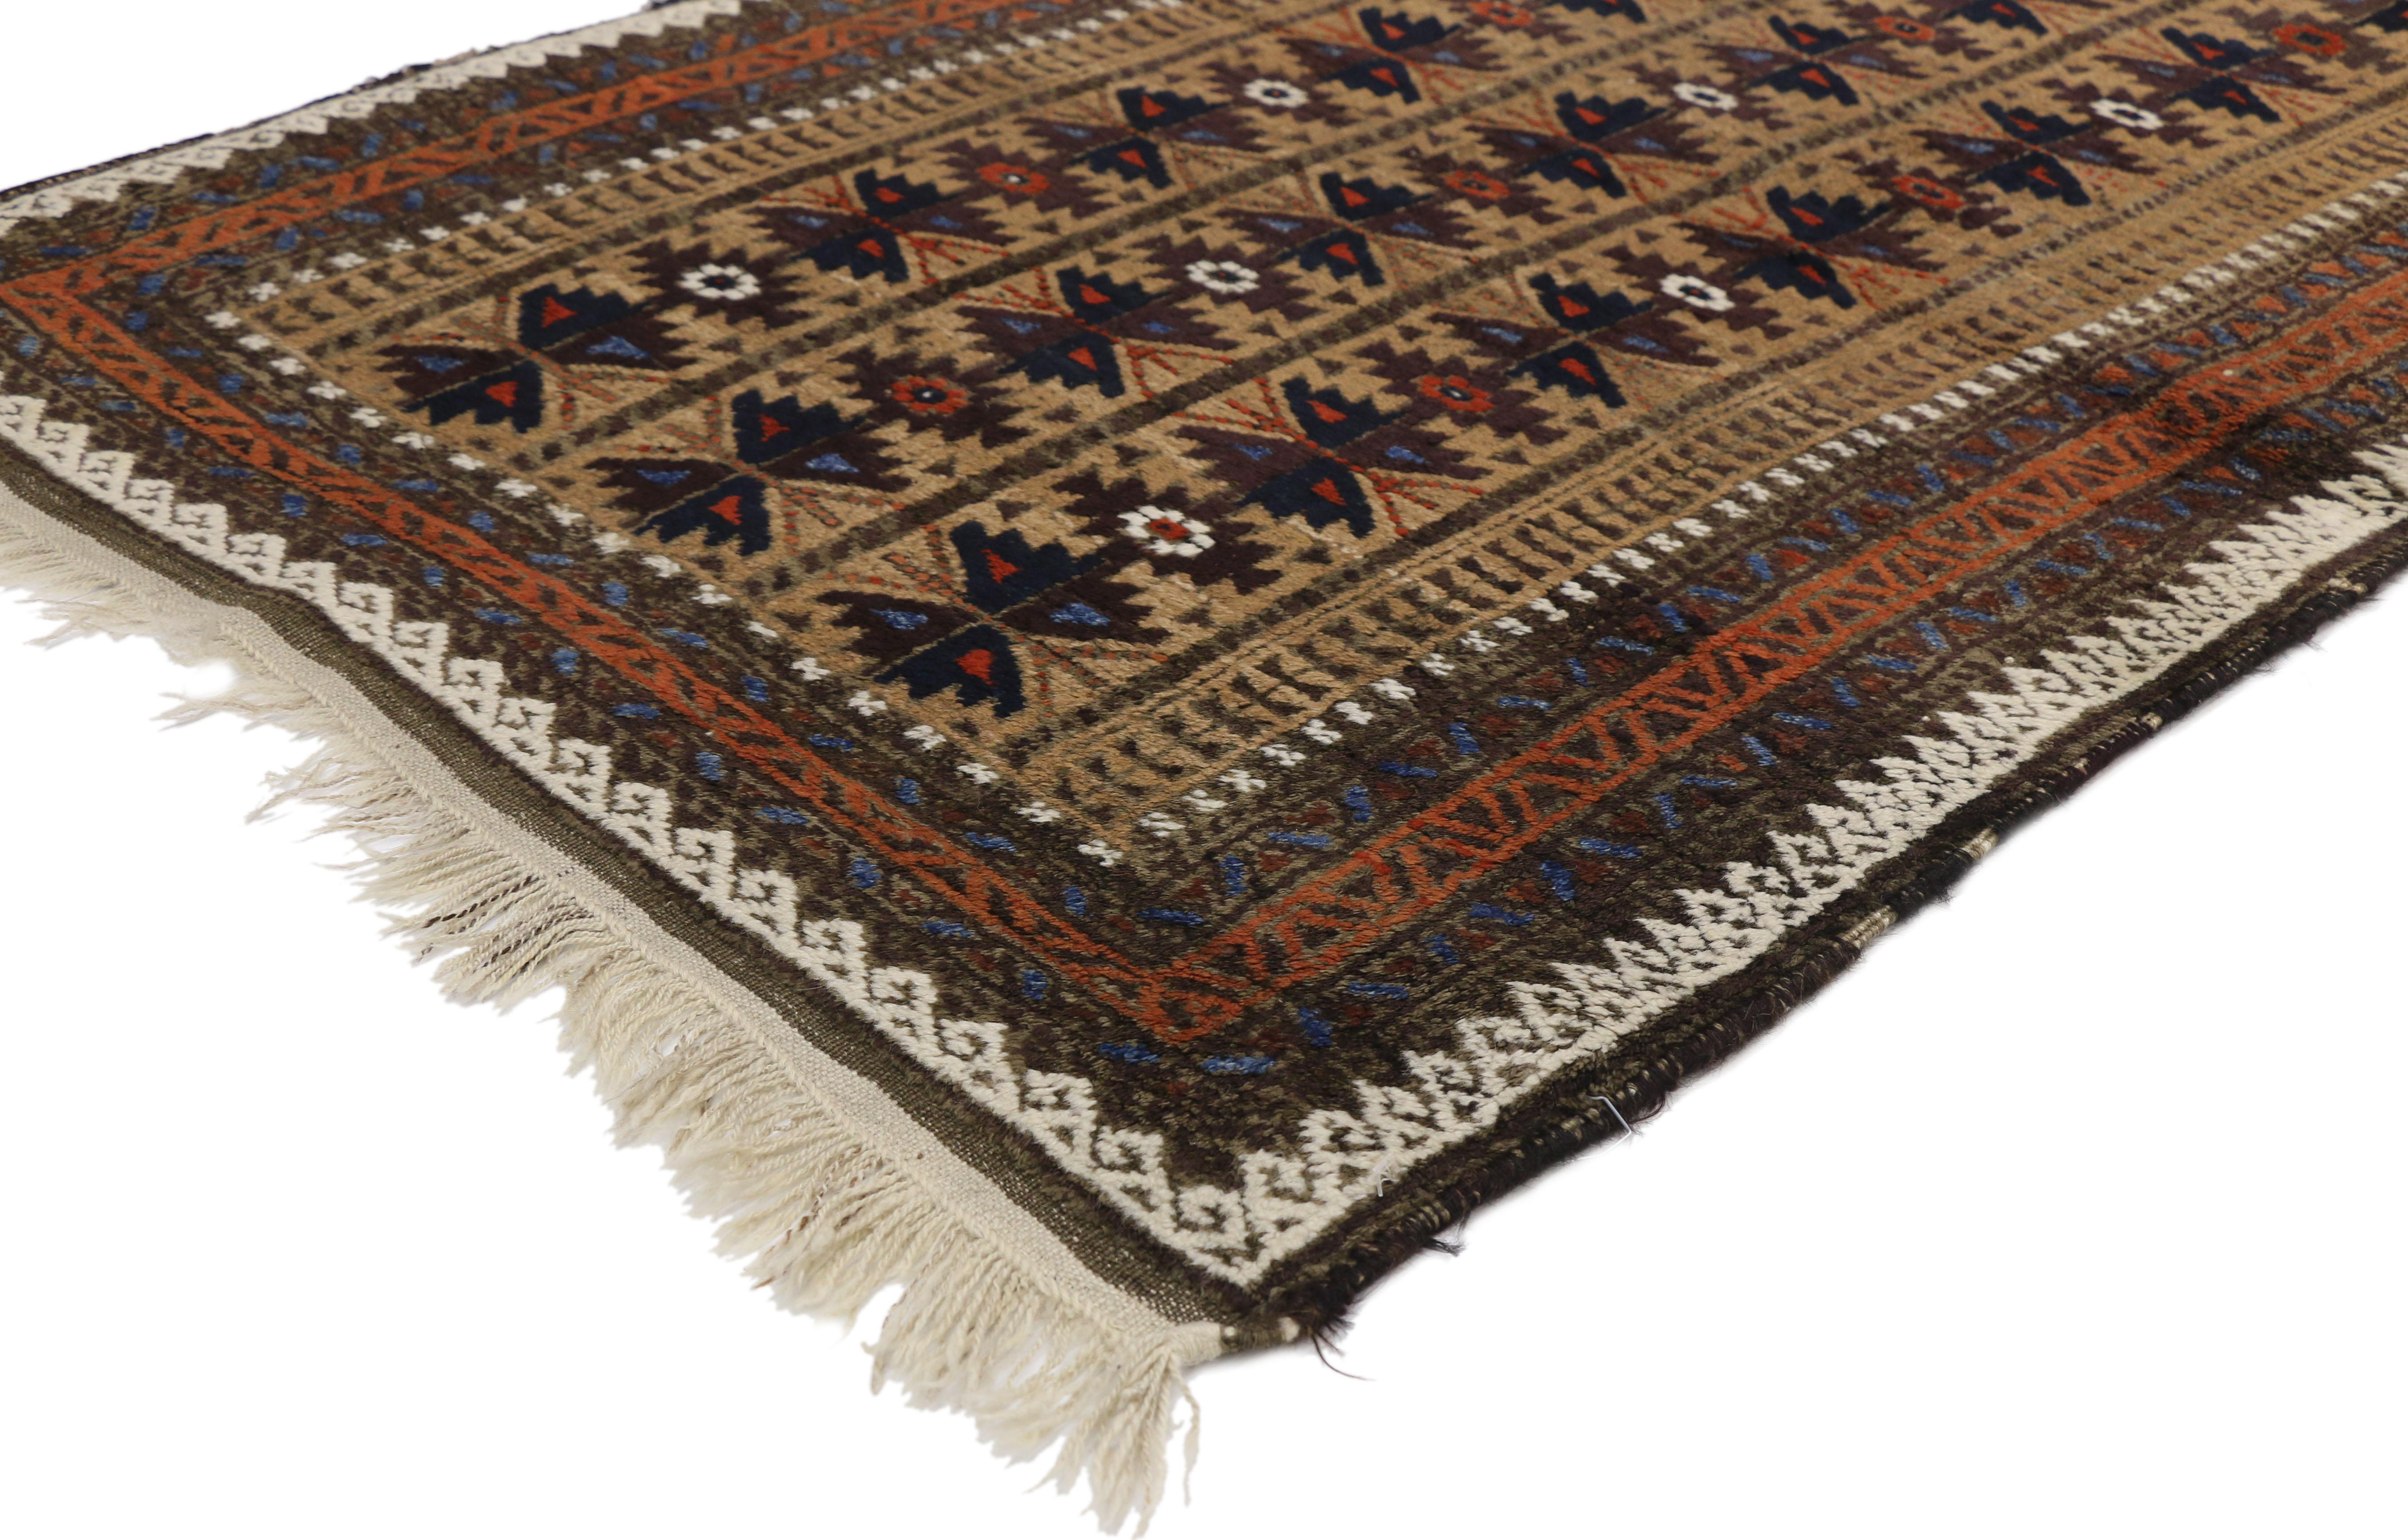 73279 Antique Persian Arab Baluch Tree of Life Rug, Tribal Style Entry or Foyer Rug This hand knotted wool antique Persian Arab Baluch Tree of Life rug features three vertical columns. The triple panel design is composed of four fan-shaped leaves